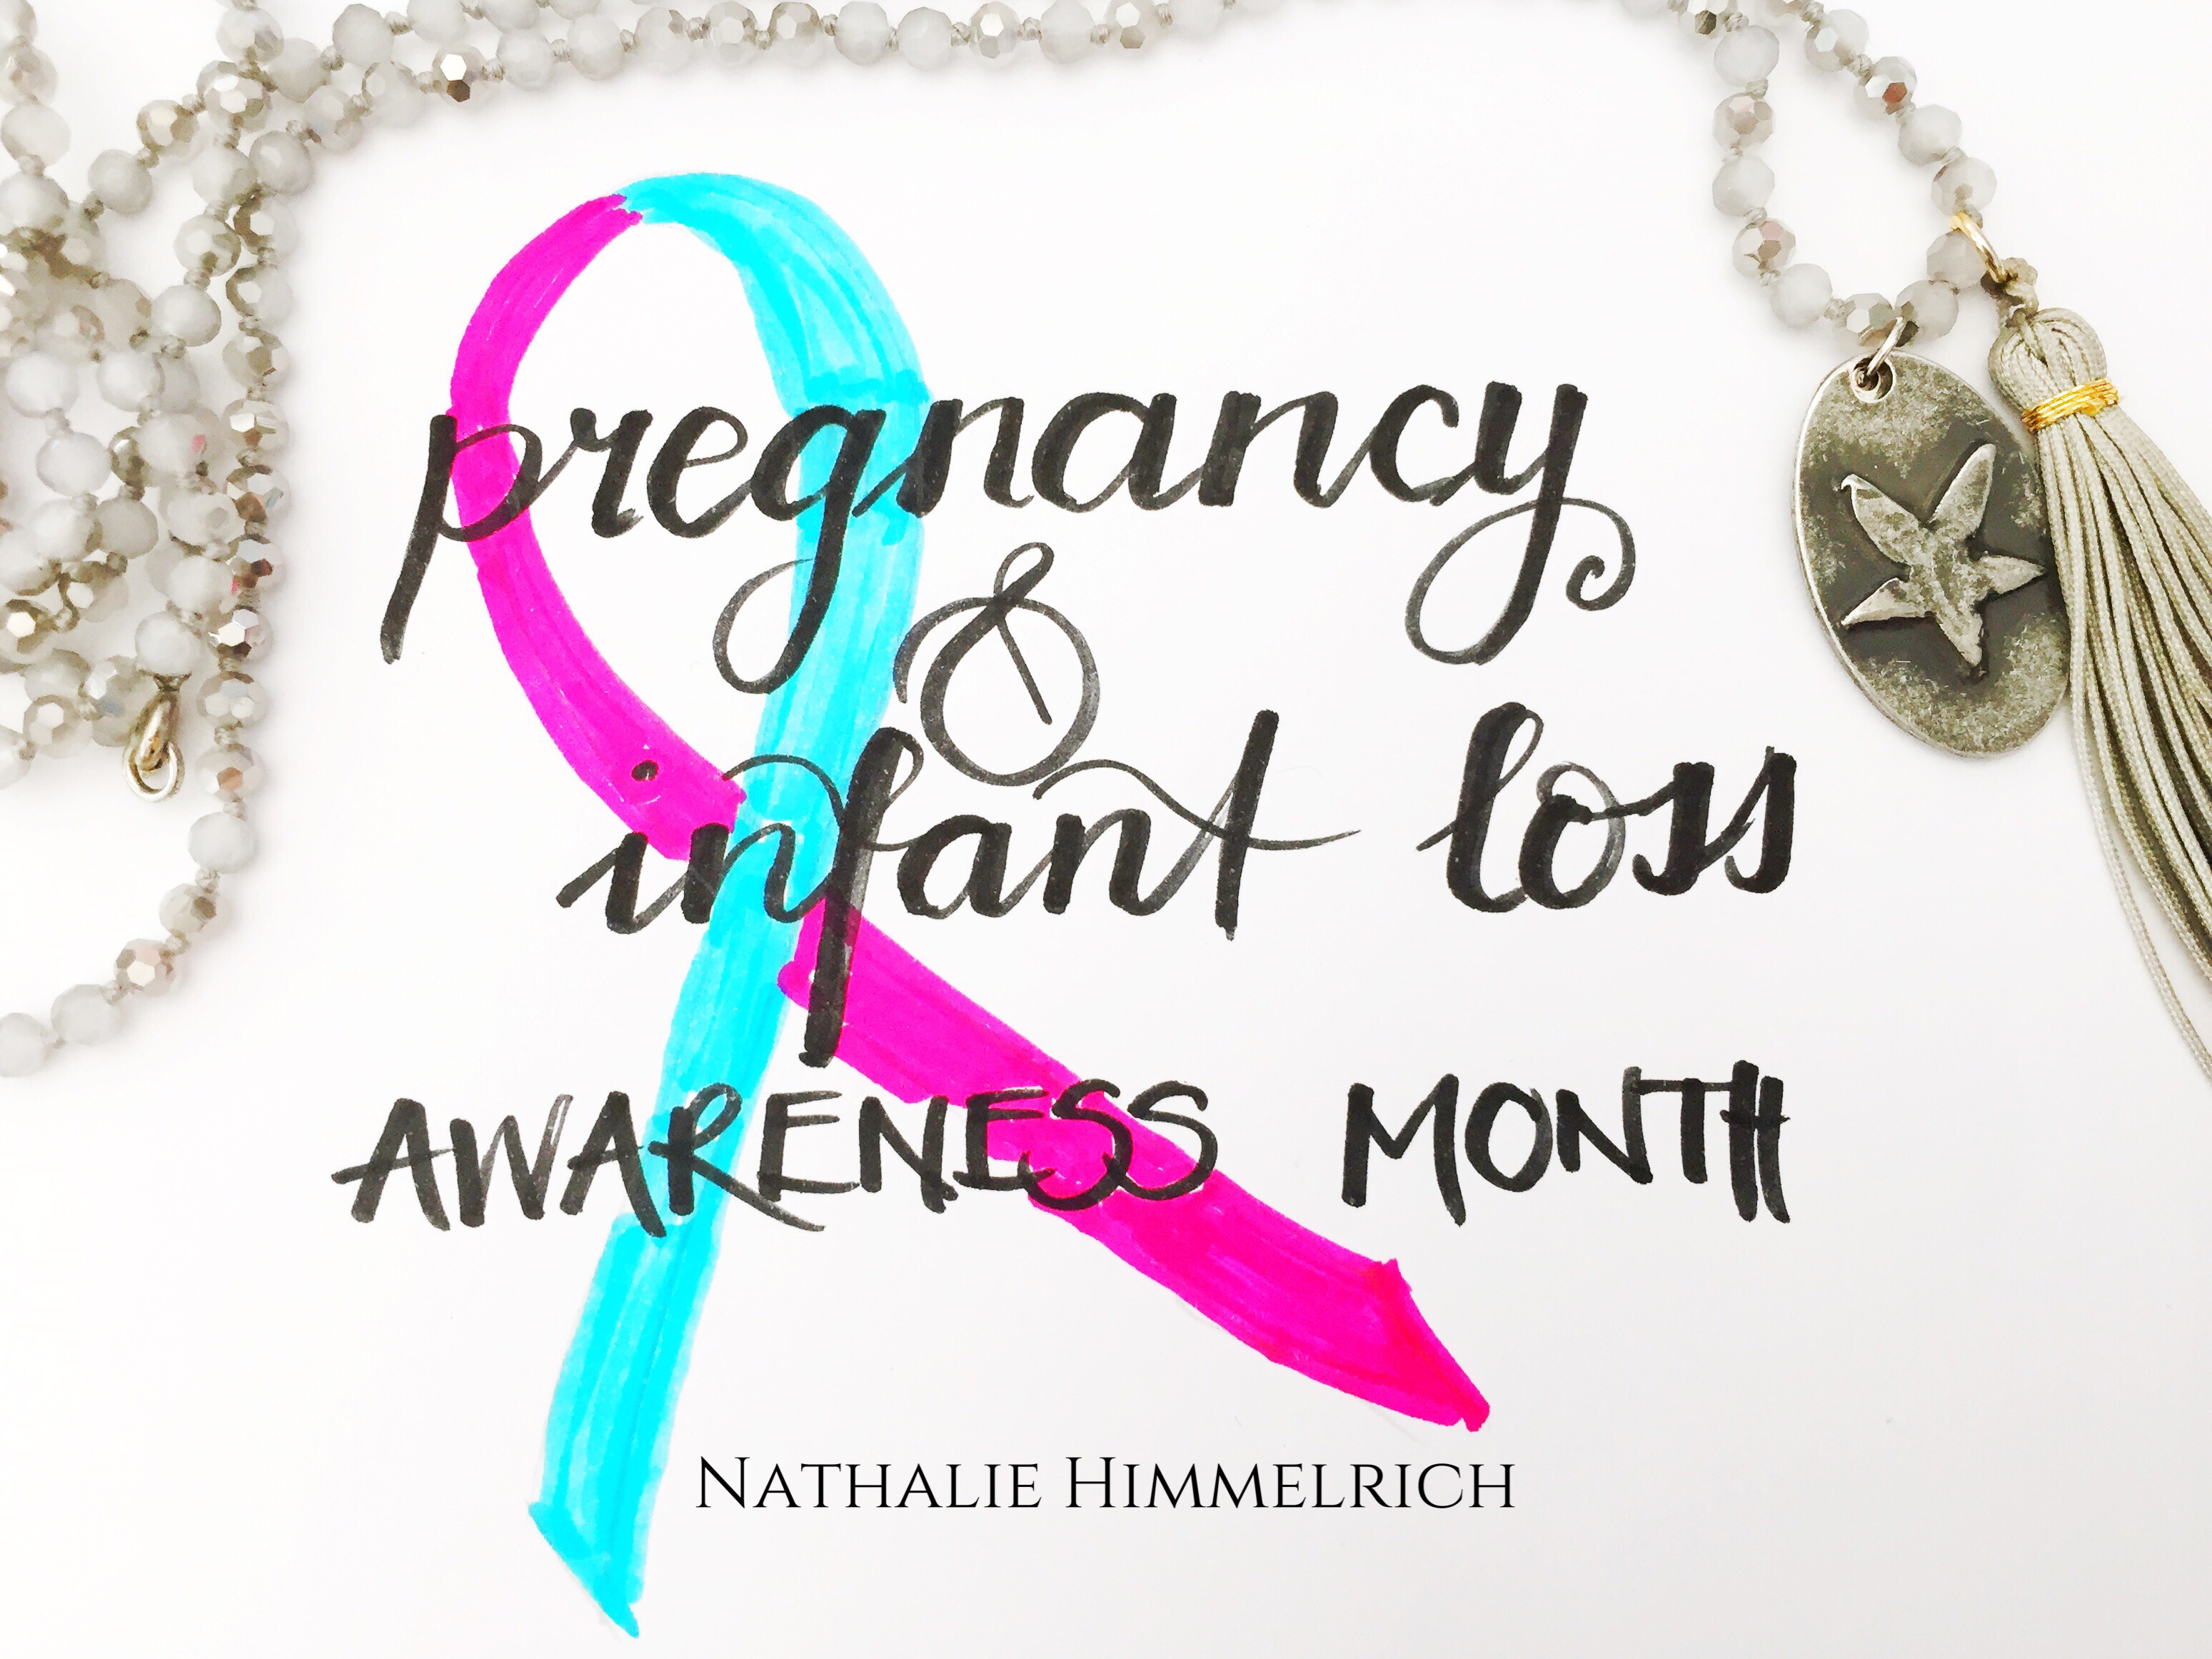 October – Pregnancy and Infant Loss Awareness Month 2016